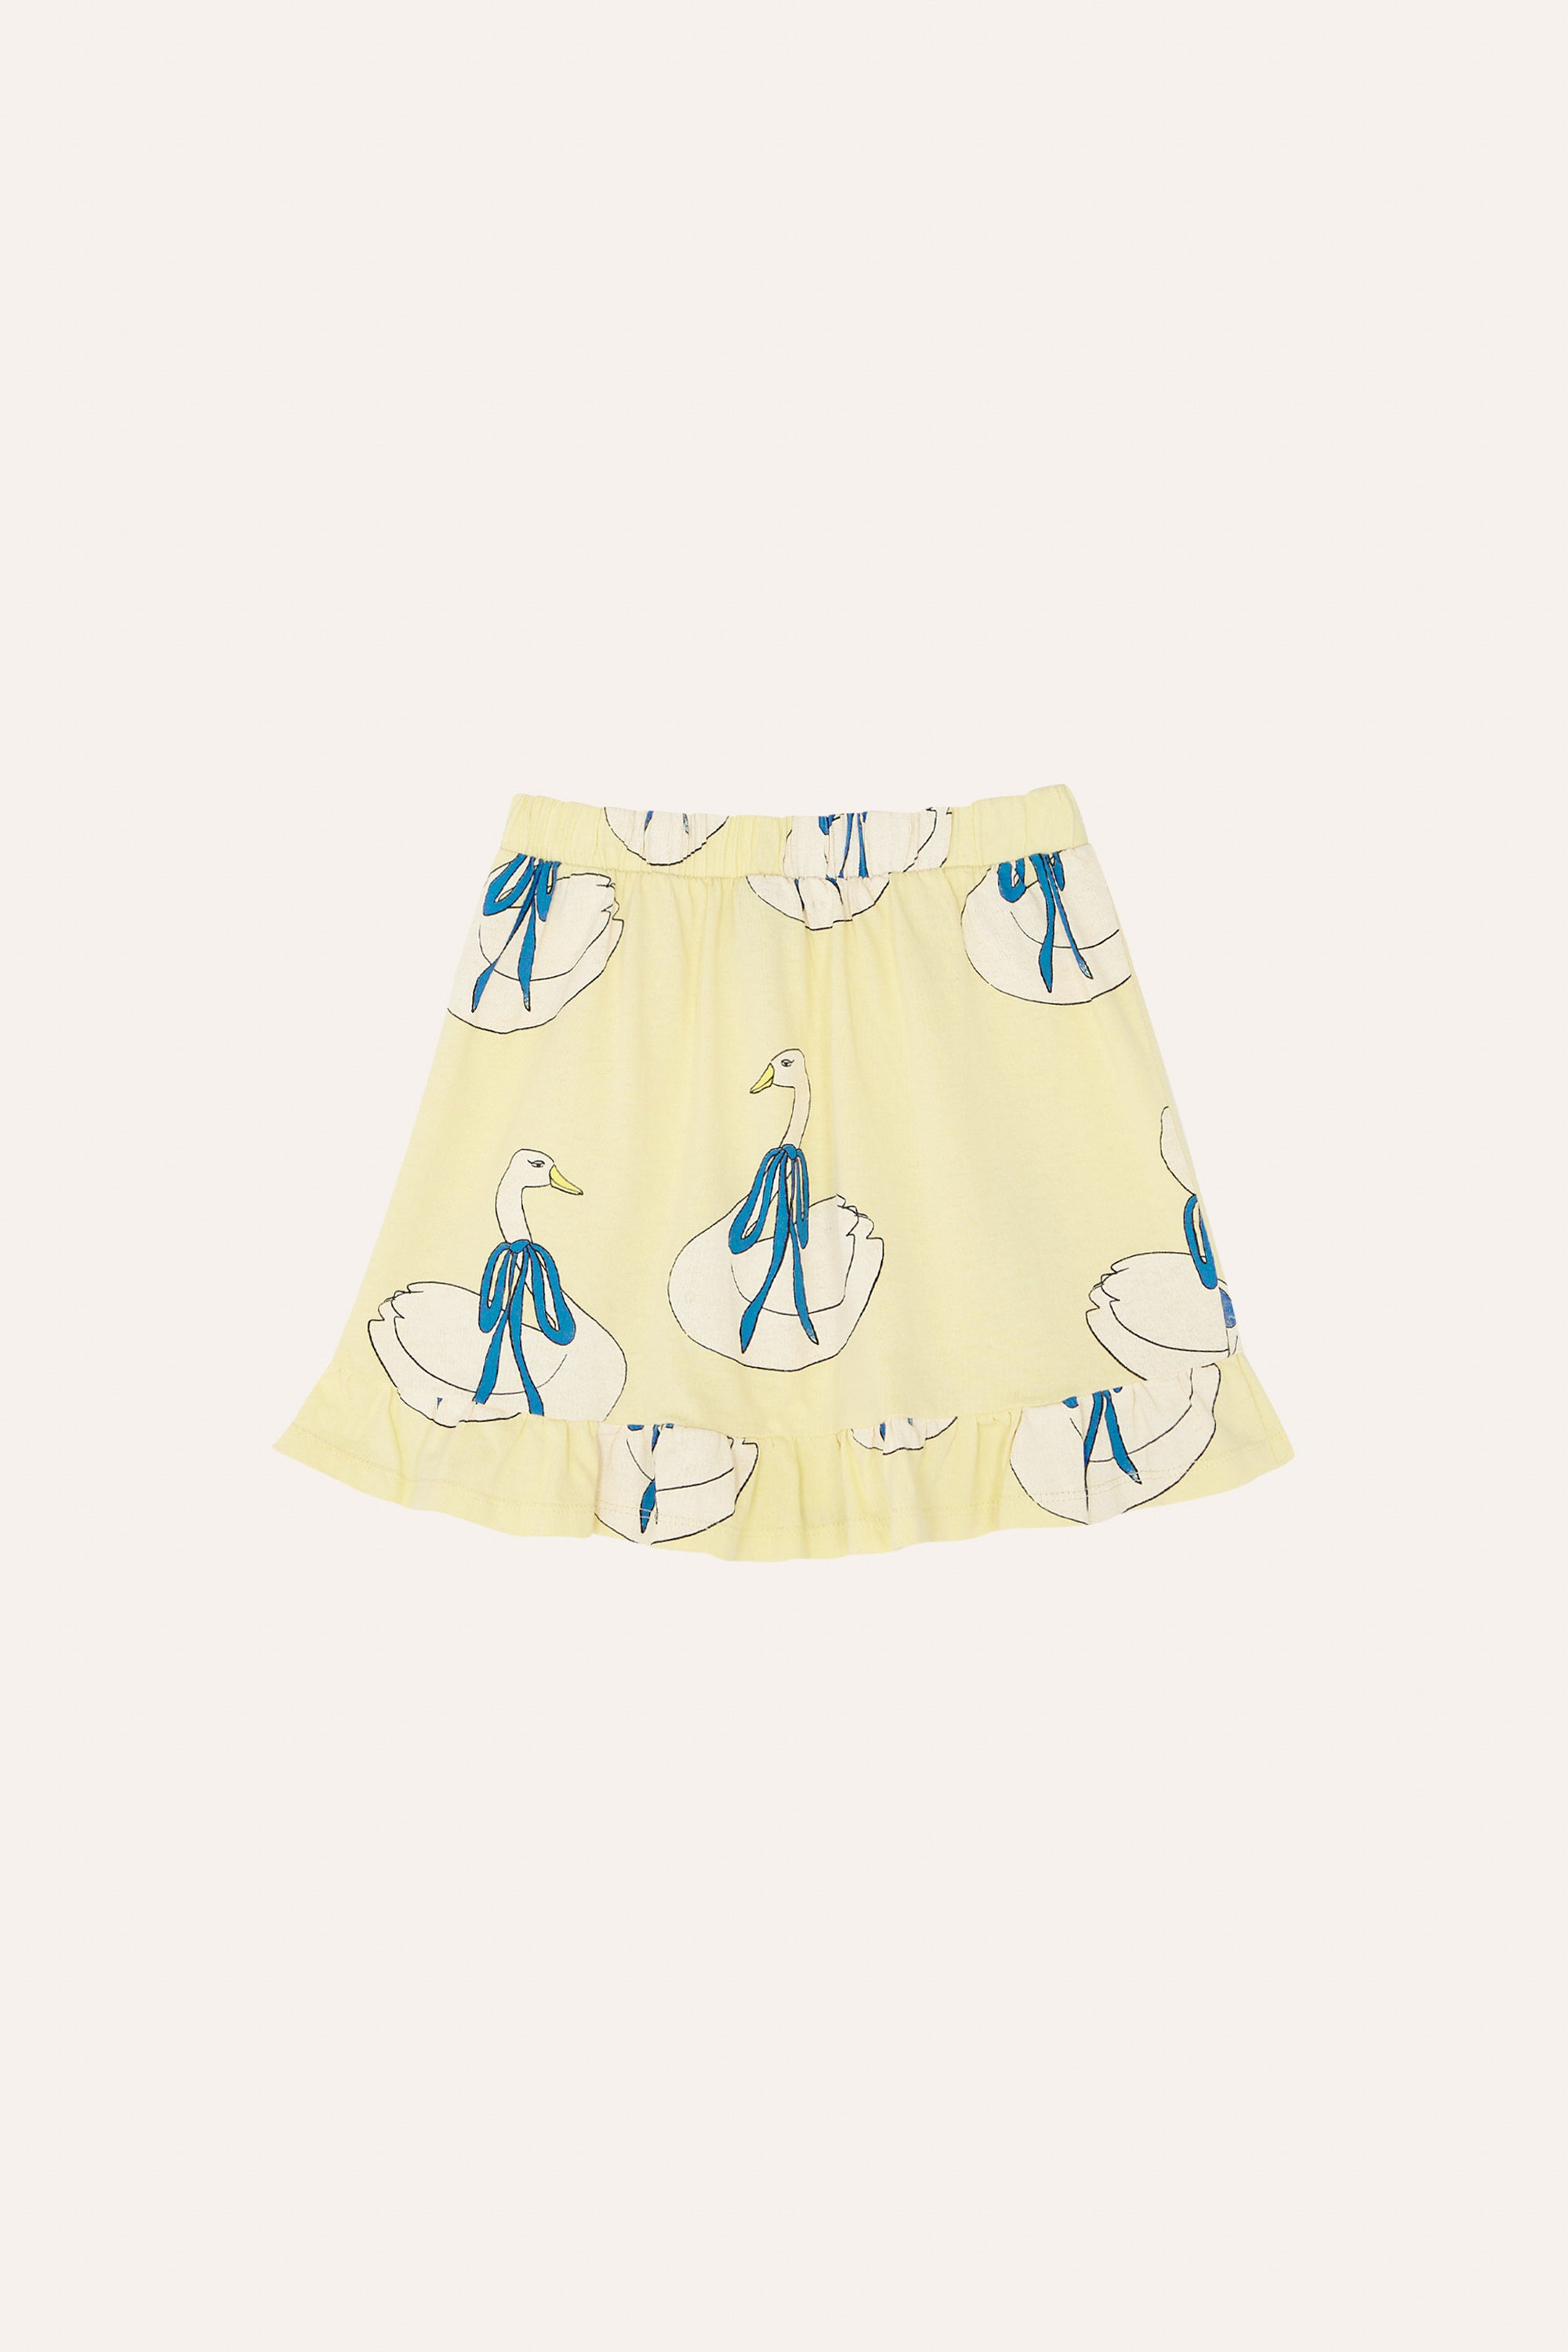 The Campamento - swans allover yellow kids skirt